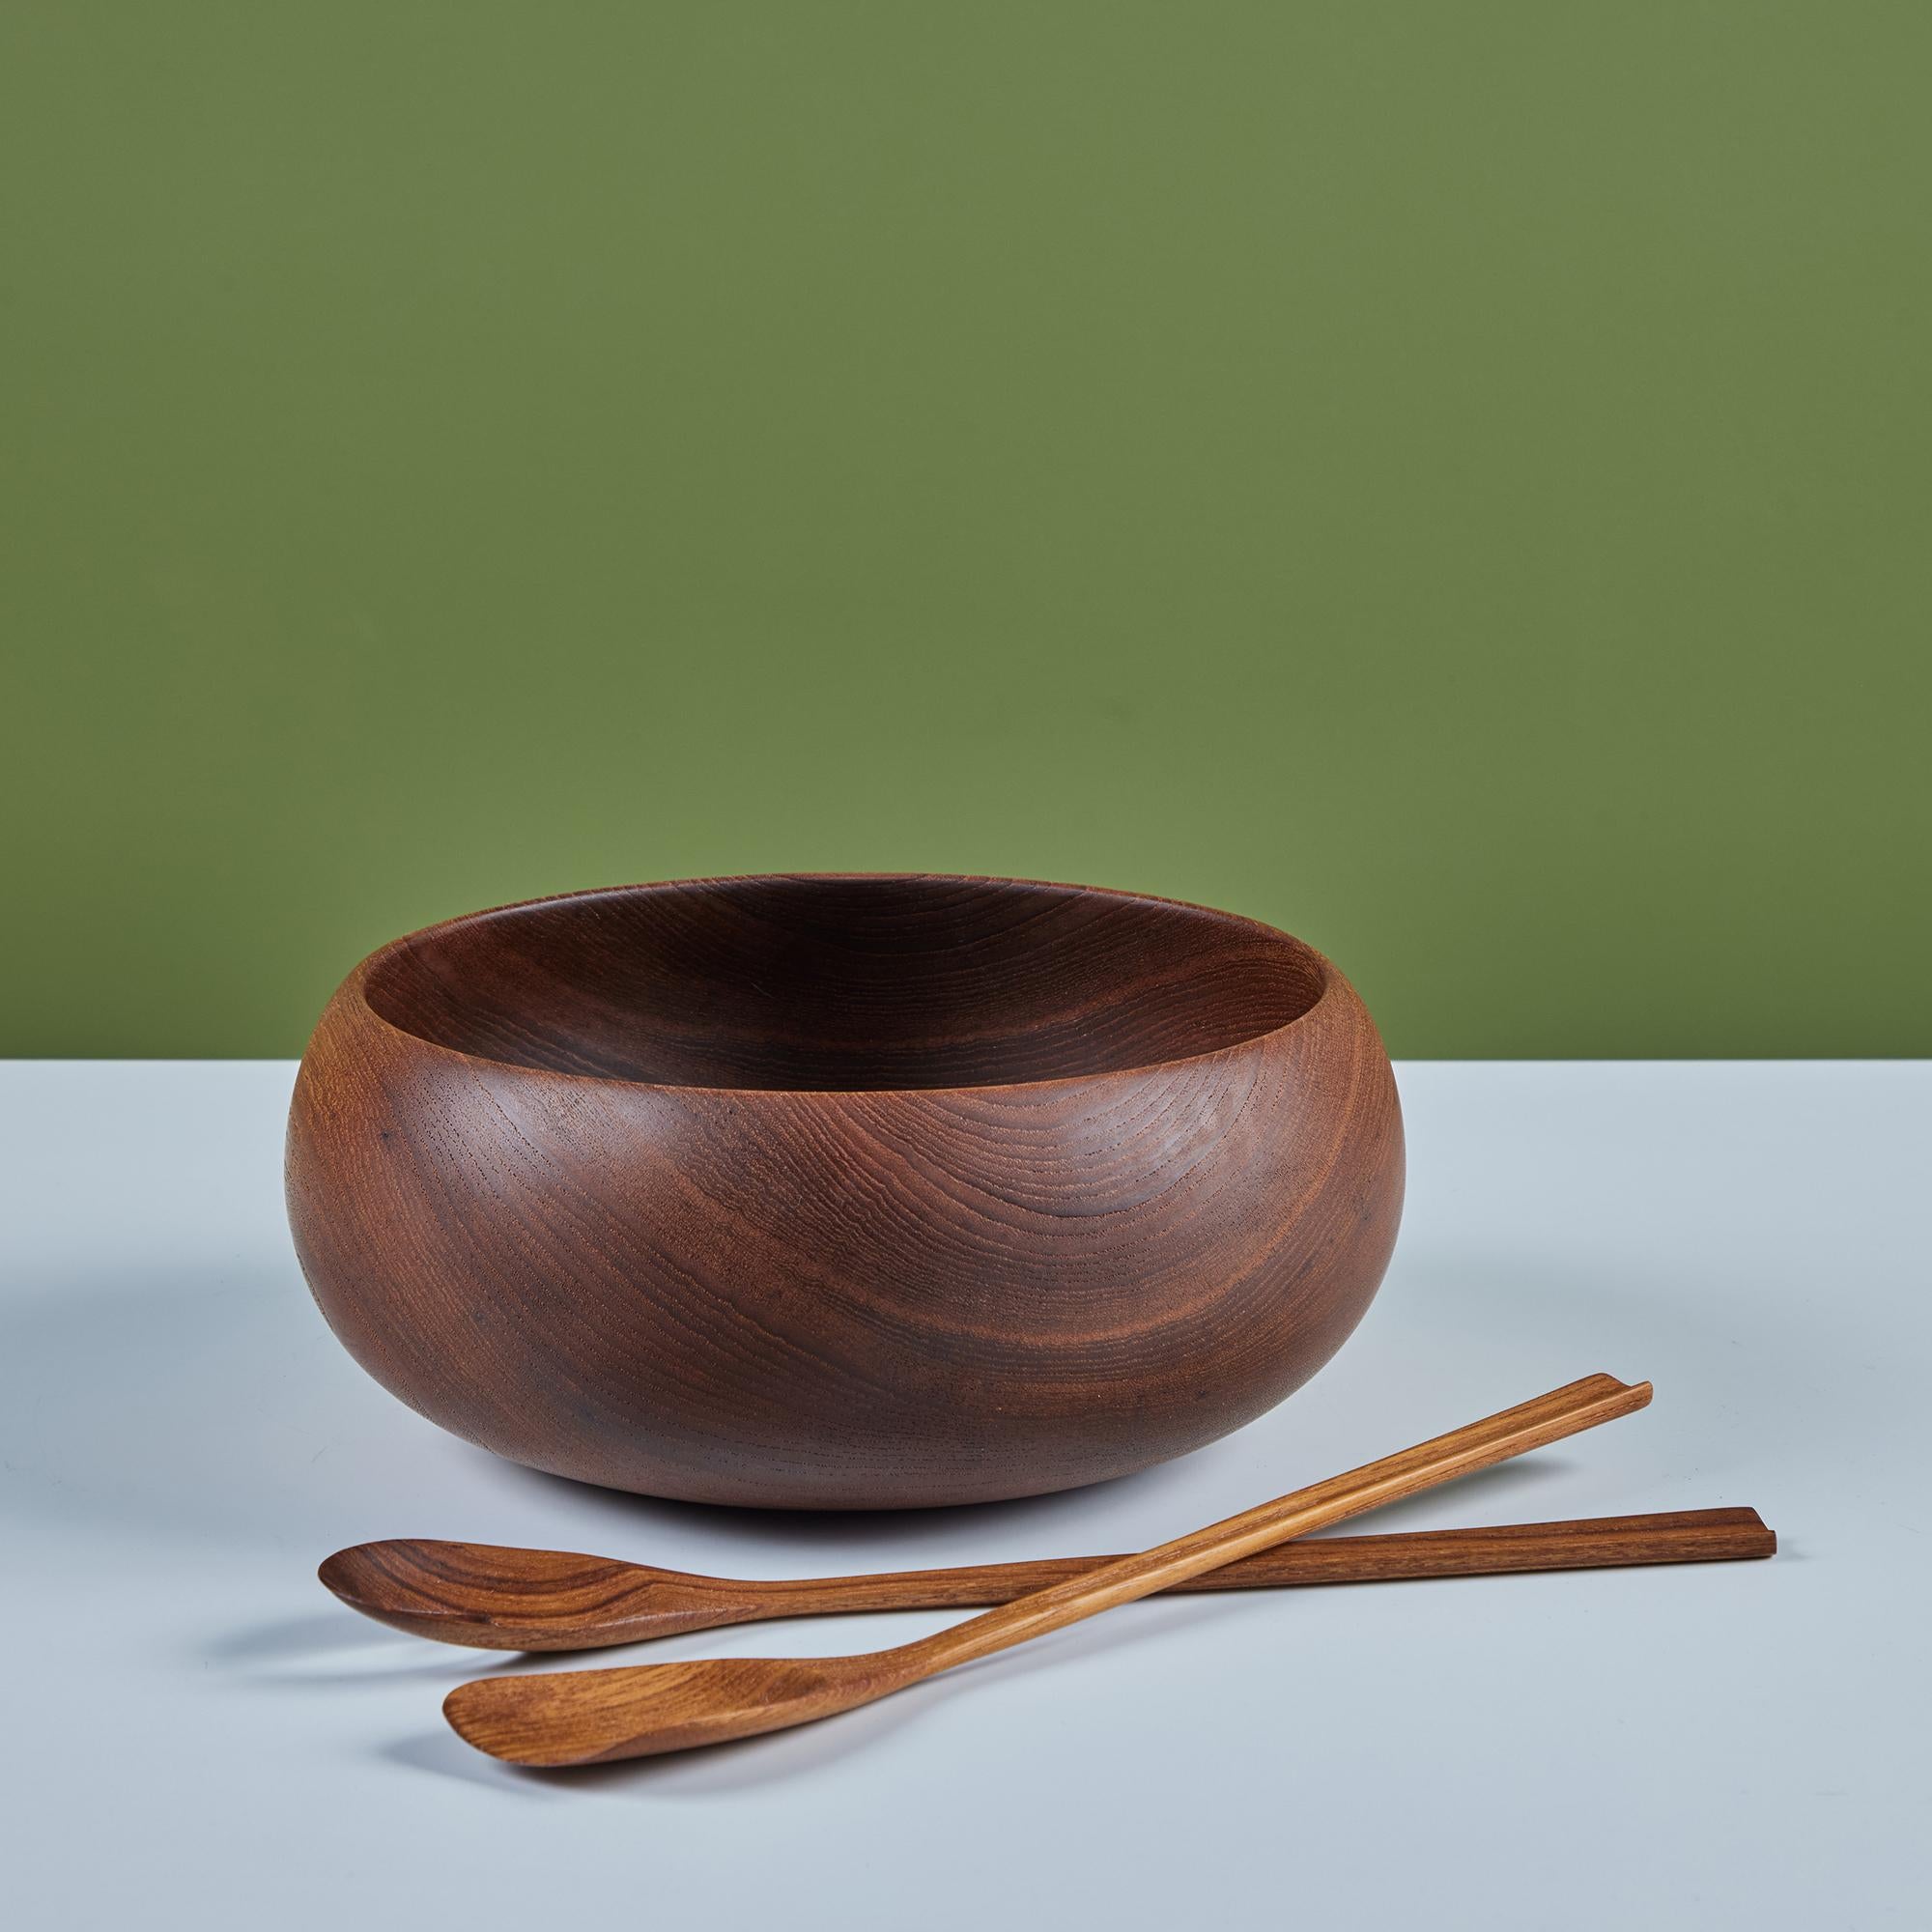 Teak wood turned bowl with utensils. This vintage piece has been exceptionally maintained, as the teak has aged to perfection.

Dimensions
Bowl: 11.25